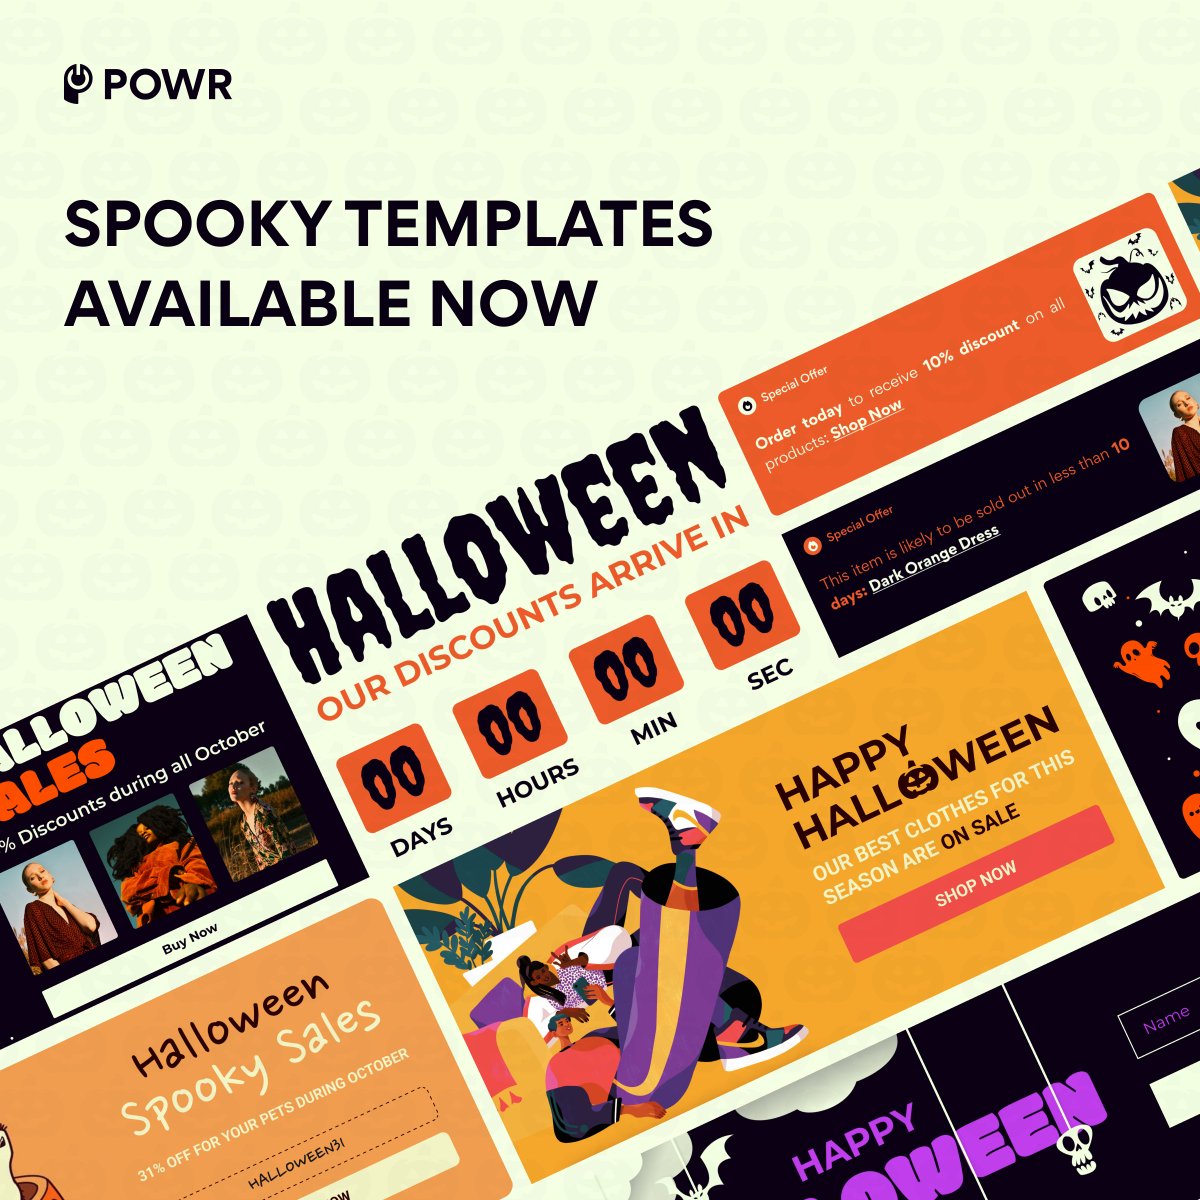 Gotta big Halloween sale this month? 🎃 👻 New app templates are available! Countdown Timers Popups Contact Forms Image Sliders Find them here 👇 bit.ly/48DmUEU Build urgency ahead of your sale. Use for free. Upgrade for more features. #halloween #smb #nocode